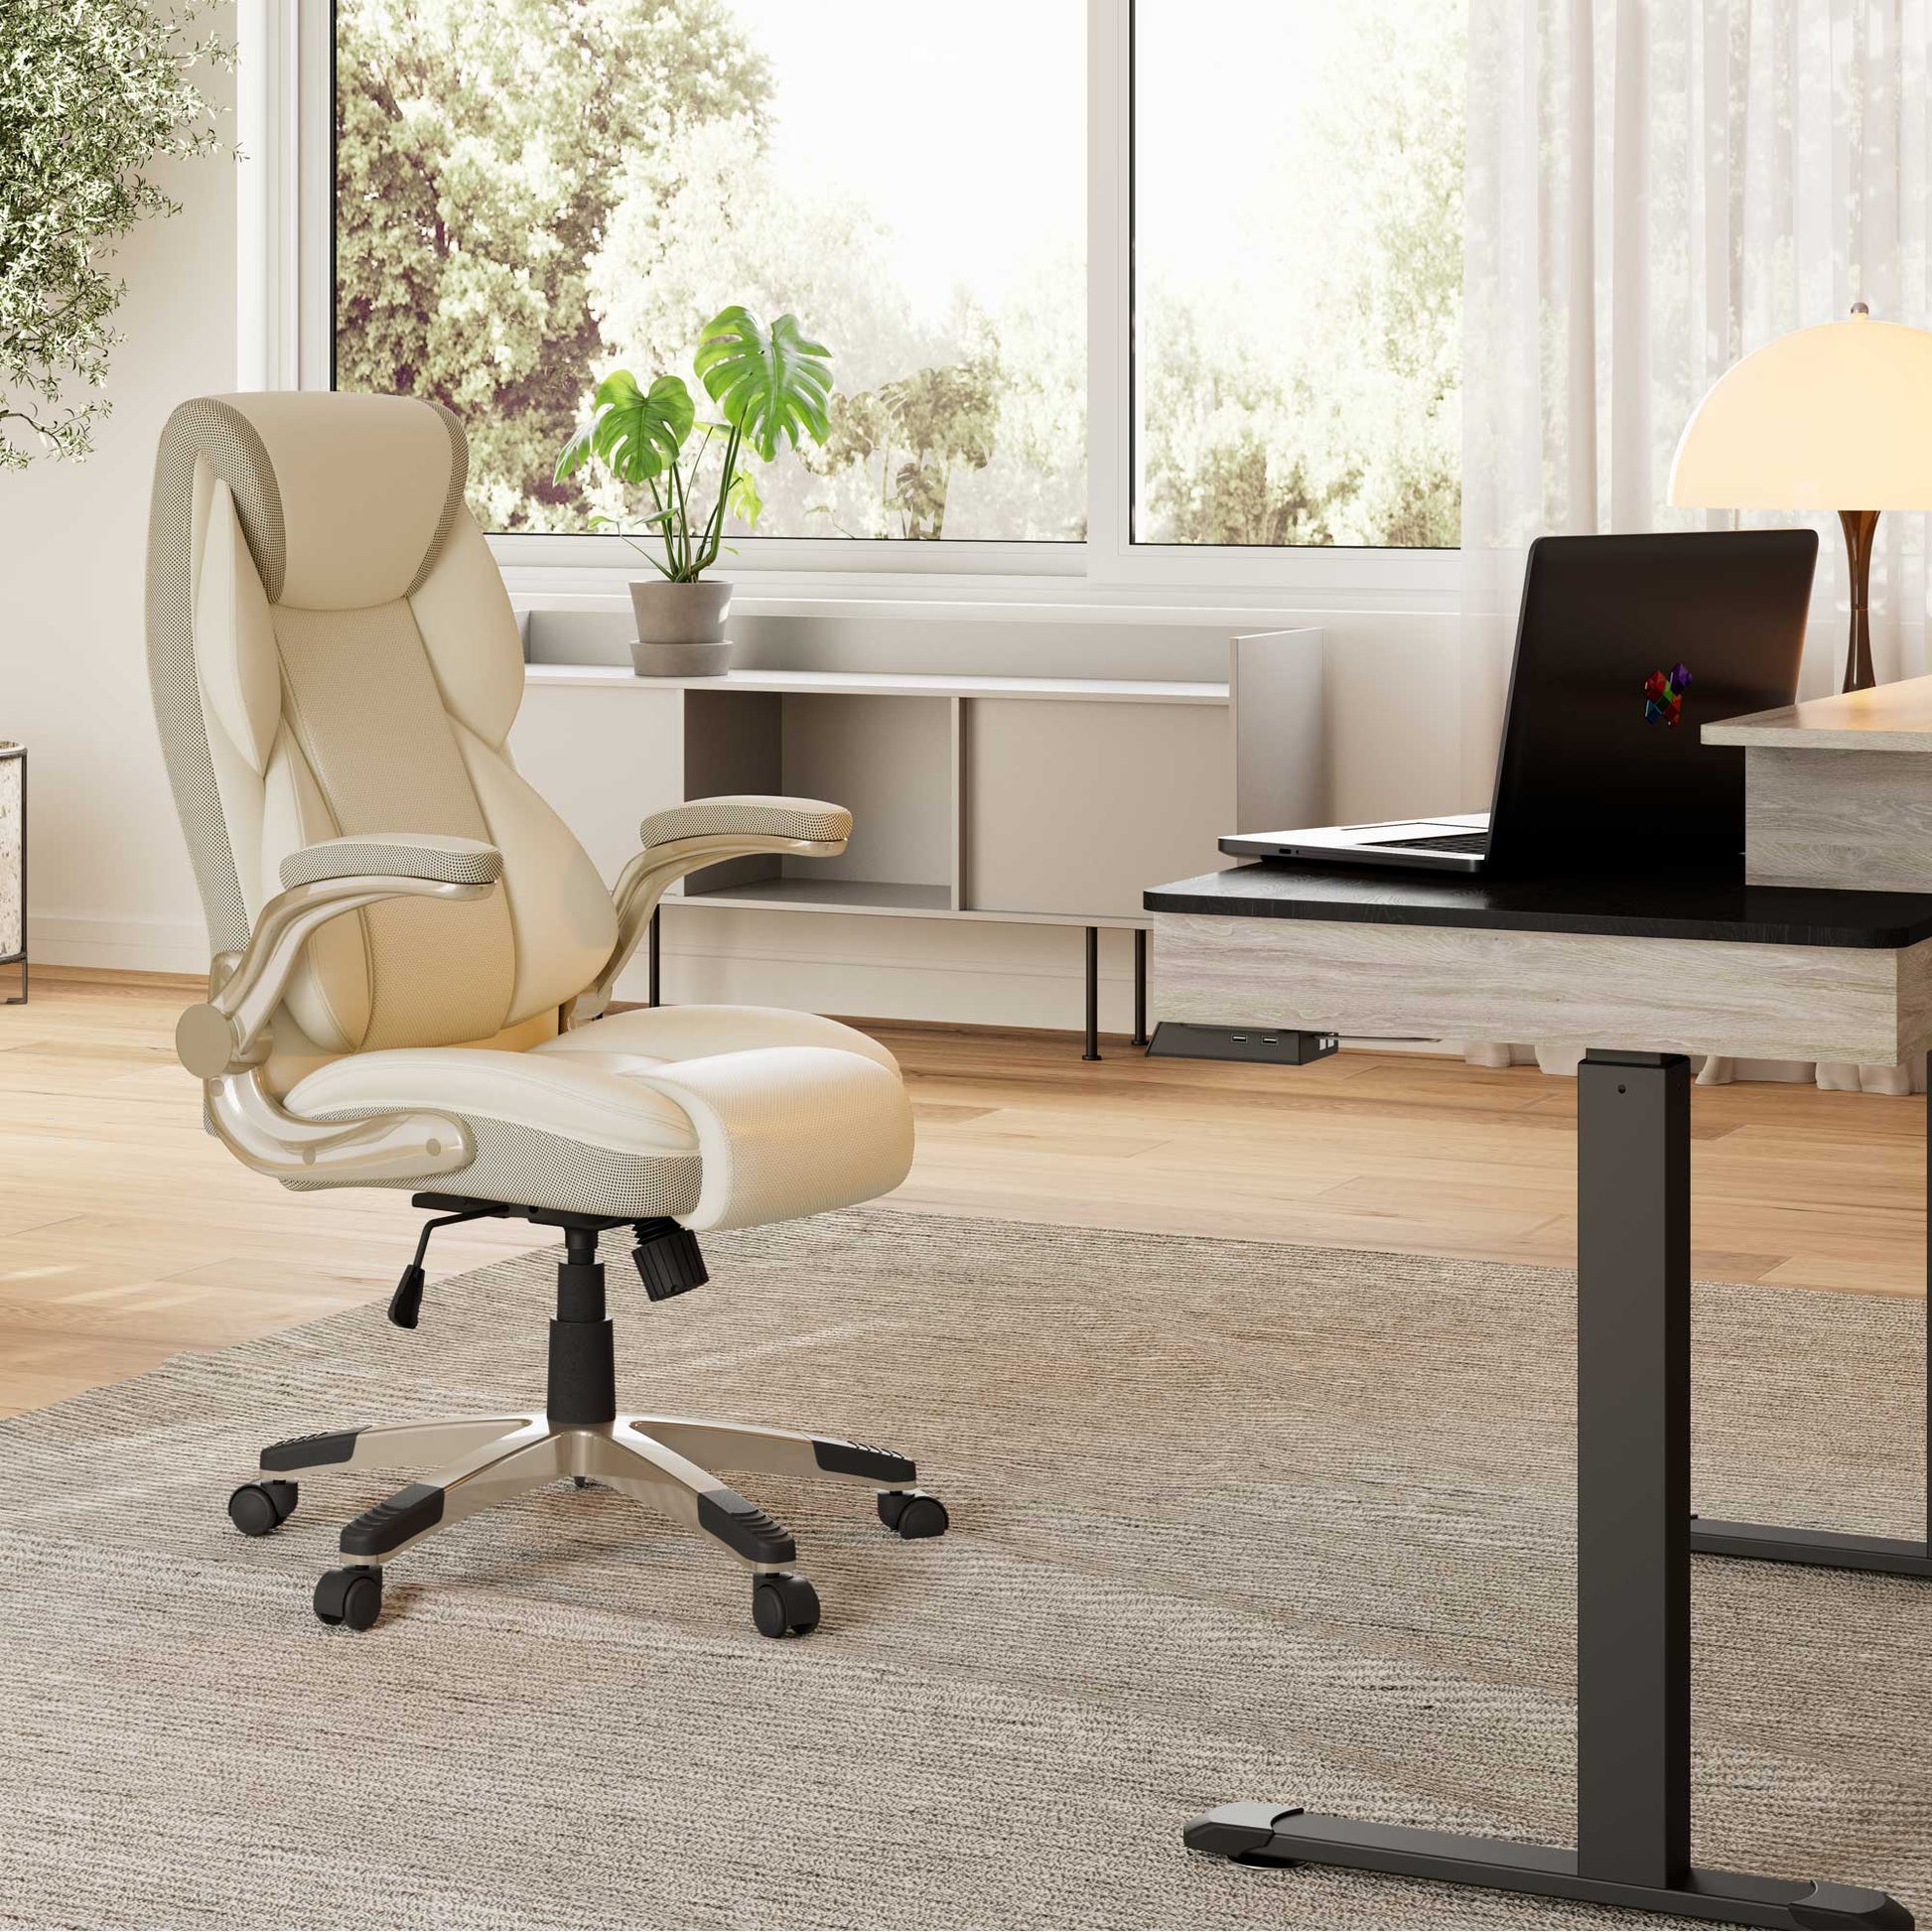 Galene, Home Office Chair, Off-White, Lifestyle Image on rug pictured with two drawer standing desk